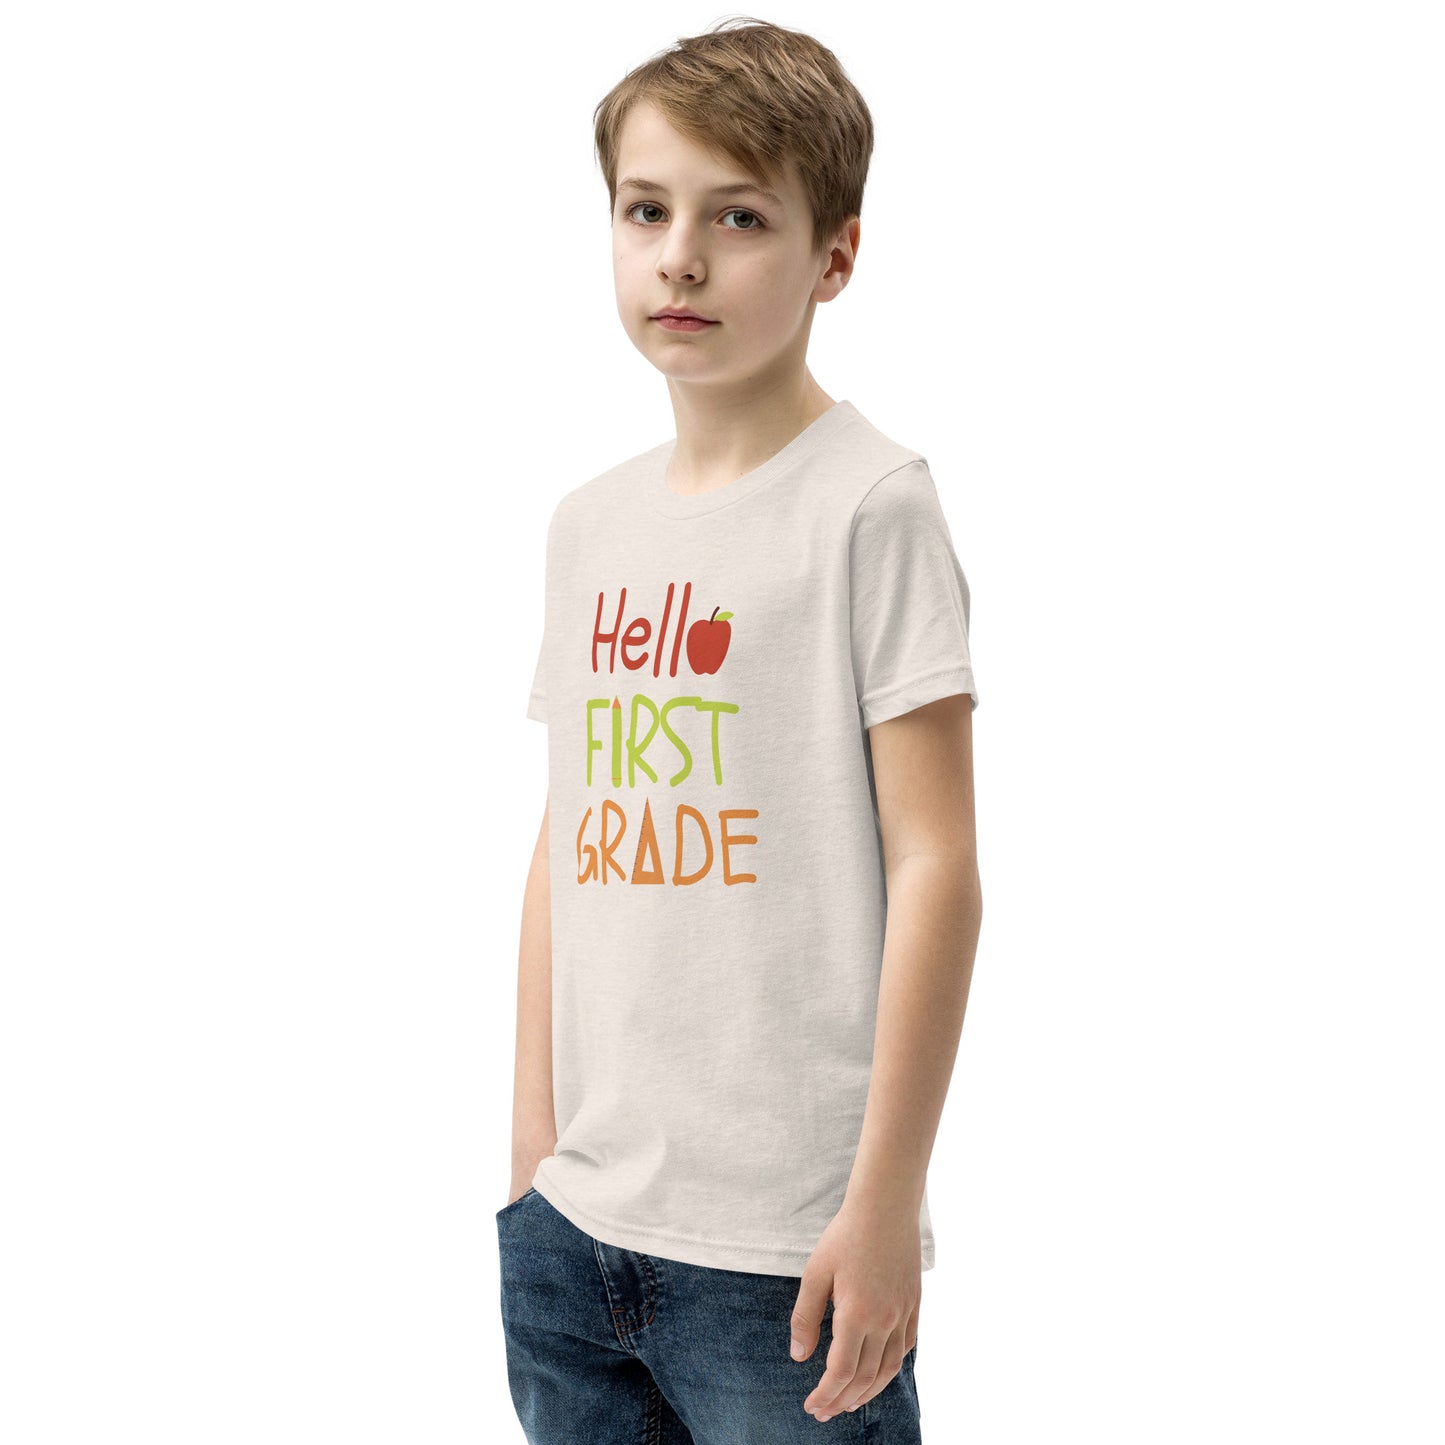 Hello first grade Youth Back to school T-shirt